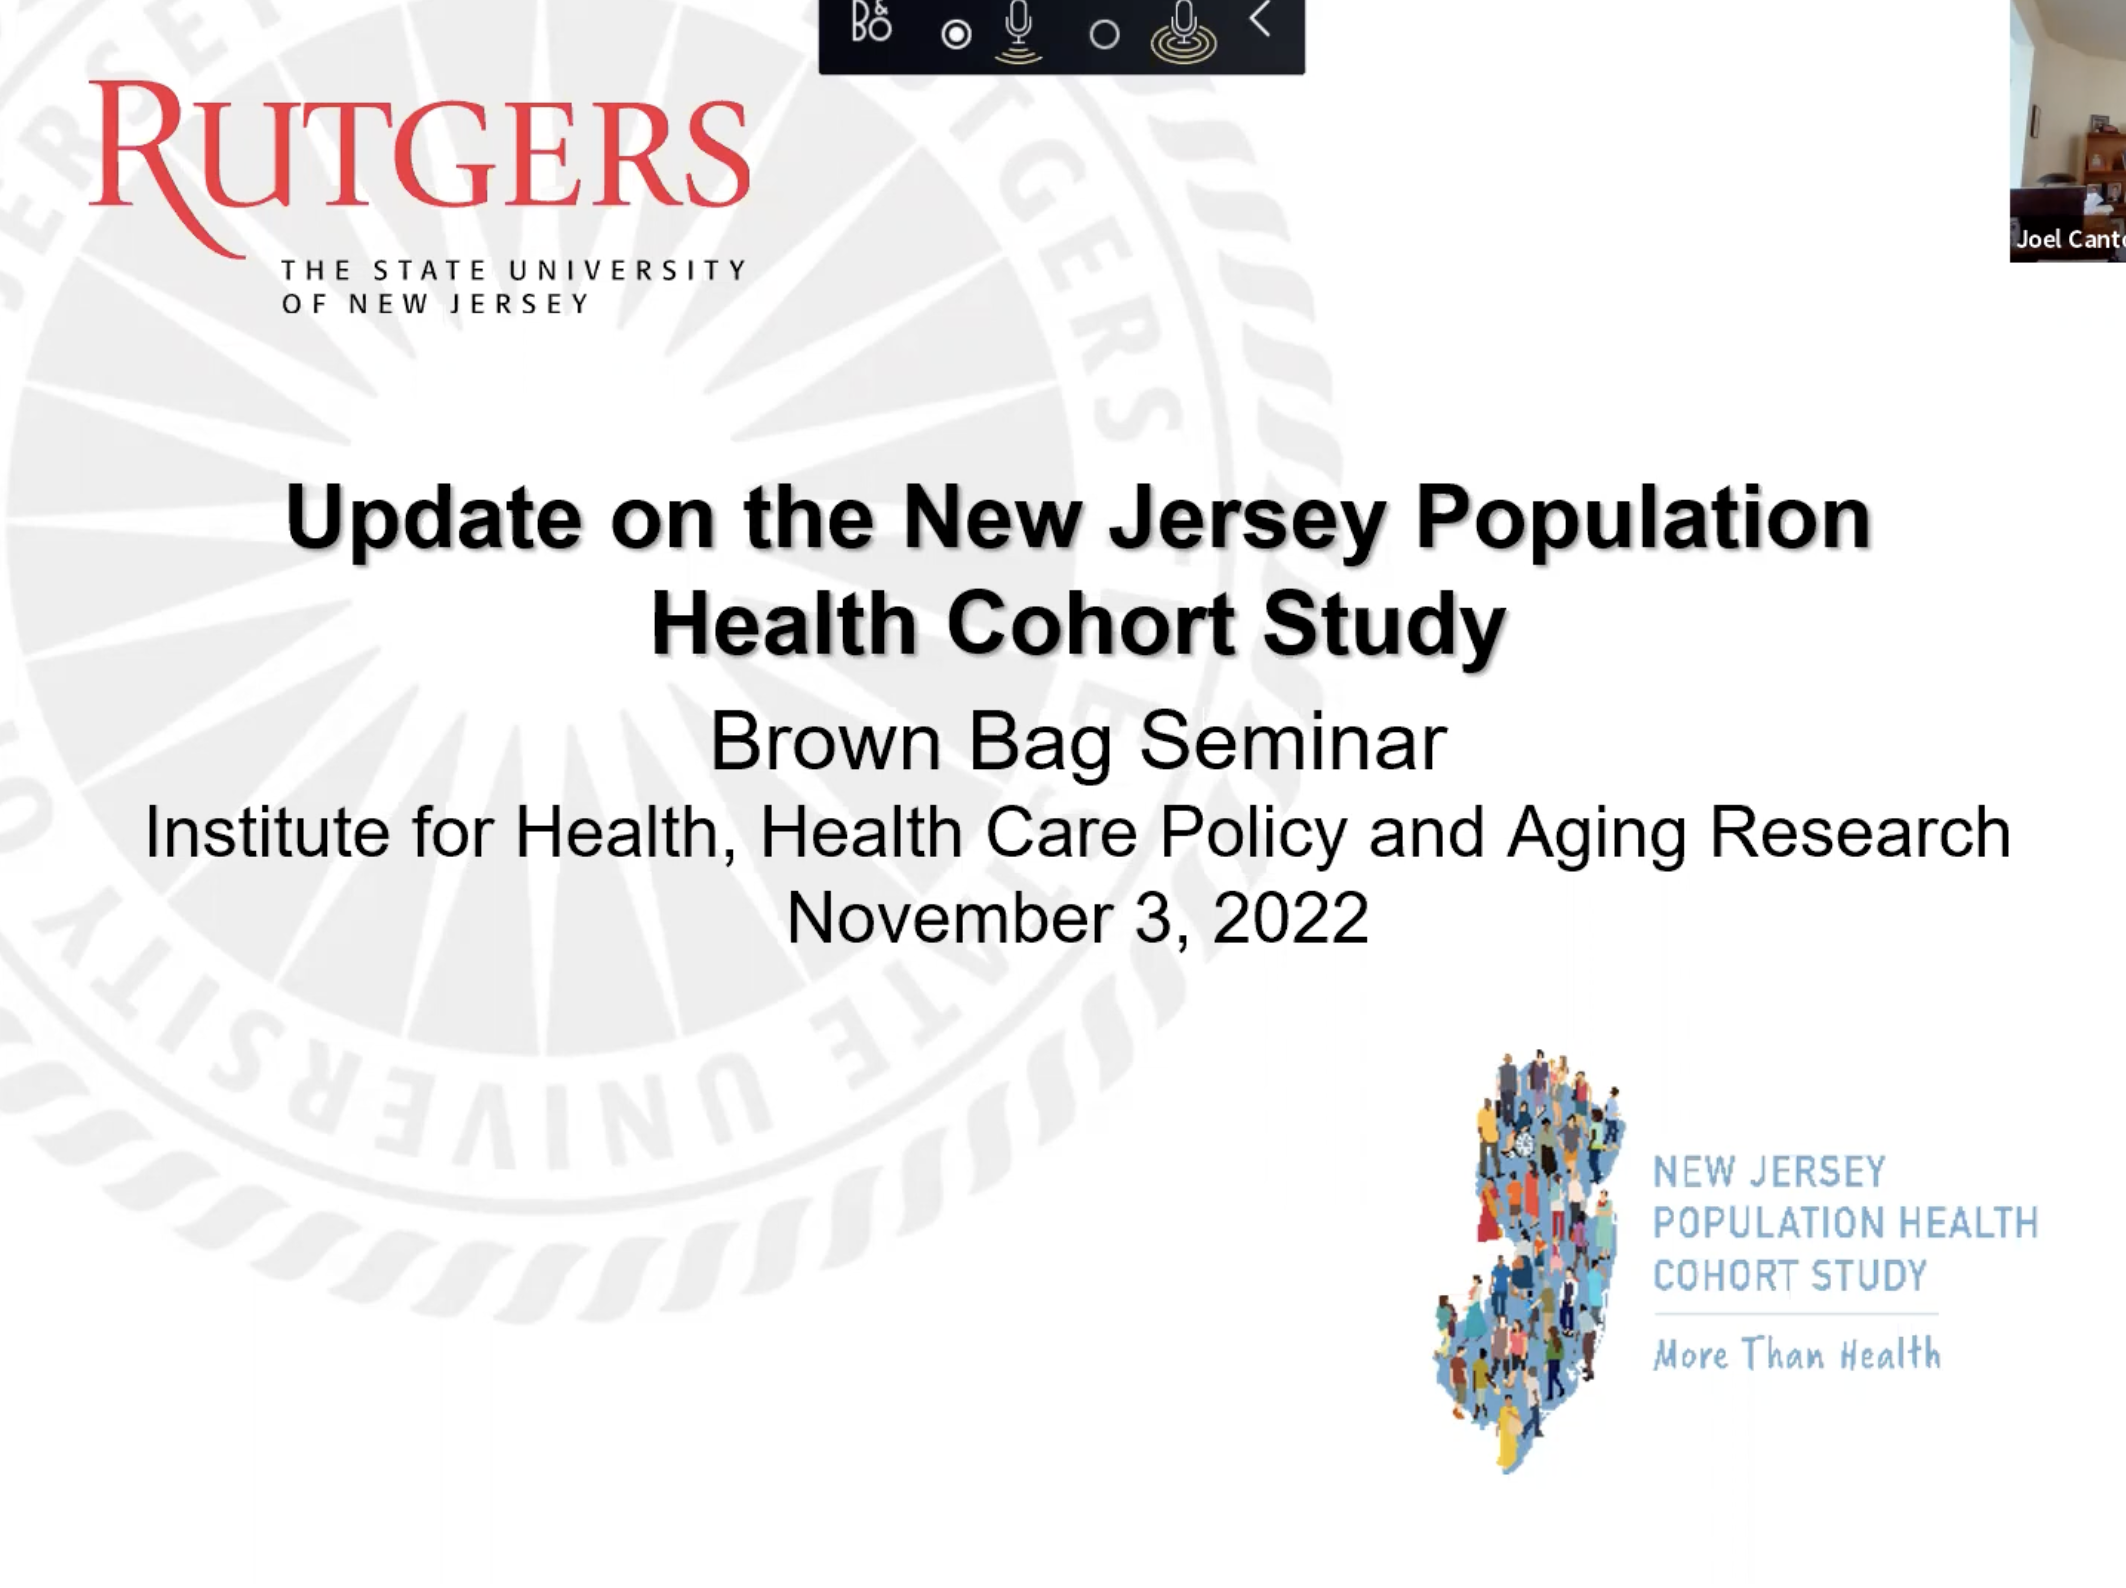 IFH Brown Bag Seminar: Update on New Jersey Population Health Cohort Study